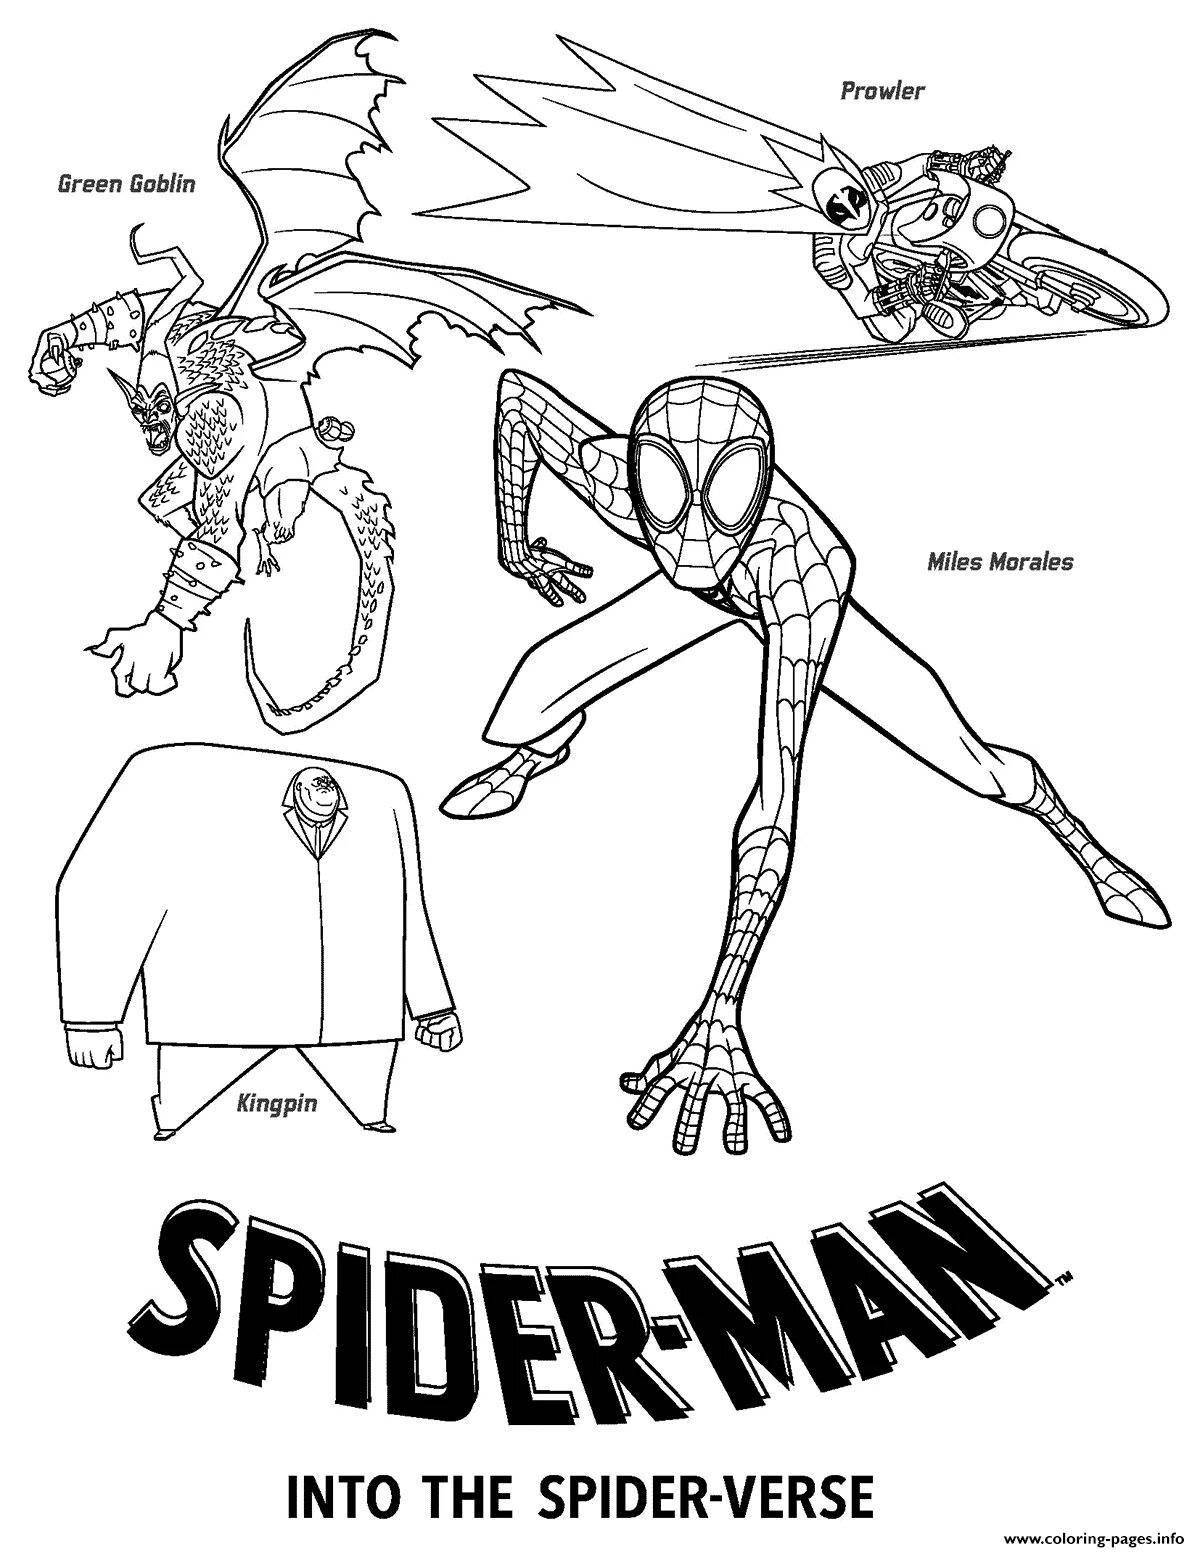 Spiderman's nefarious ghost coloring page